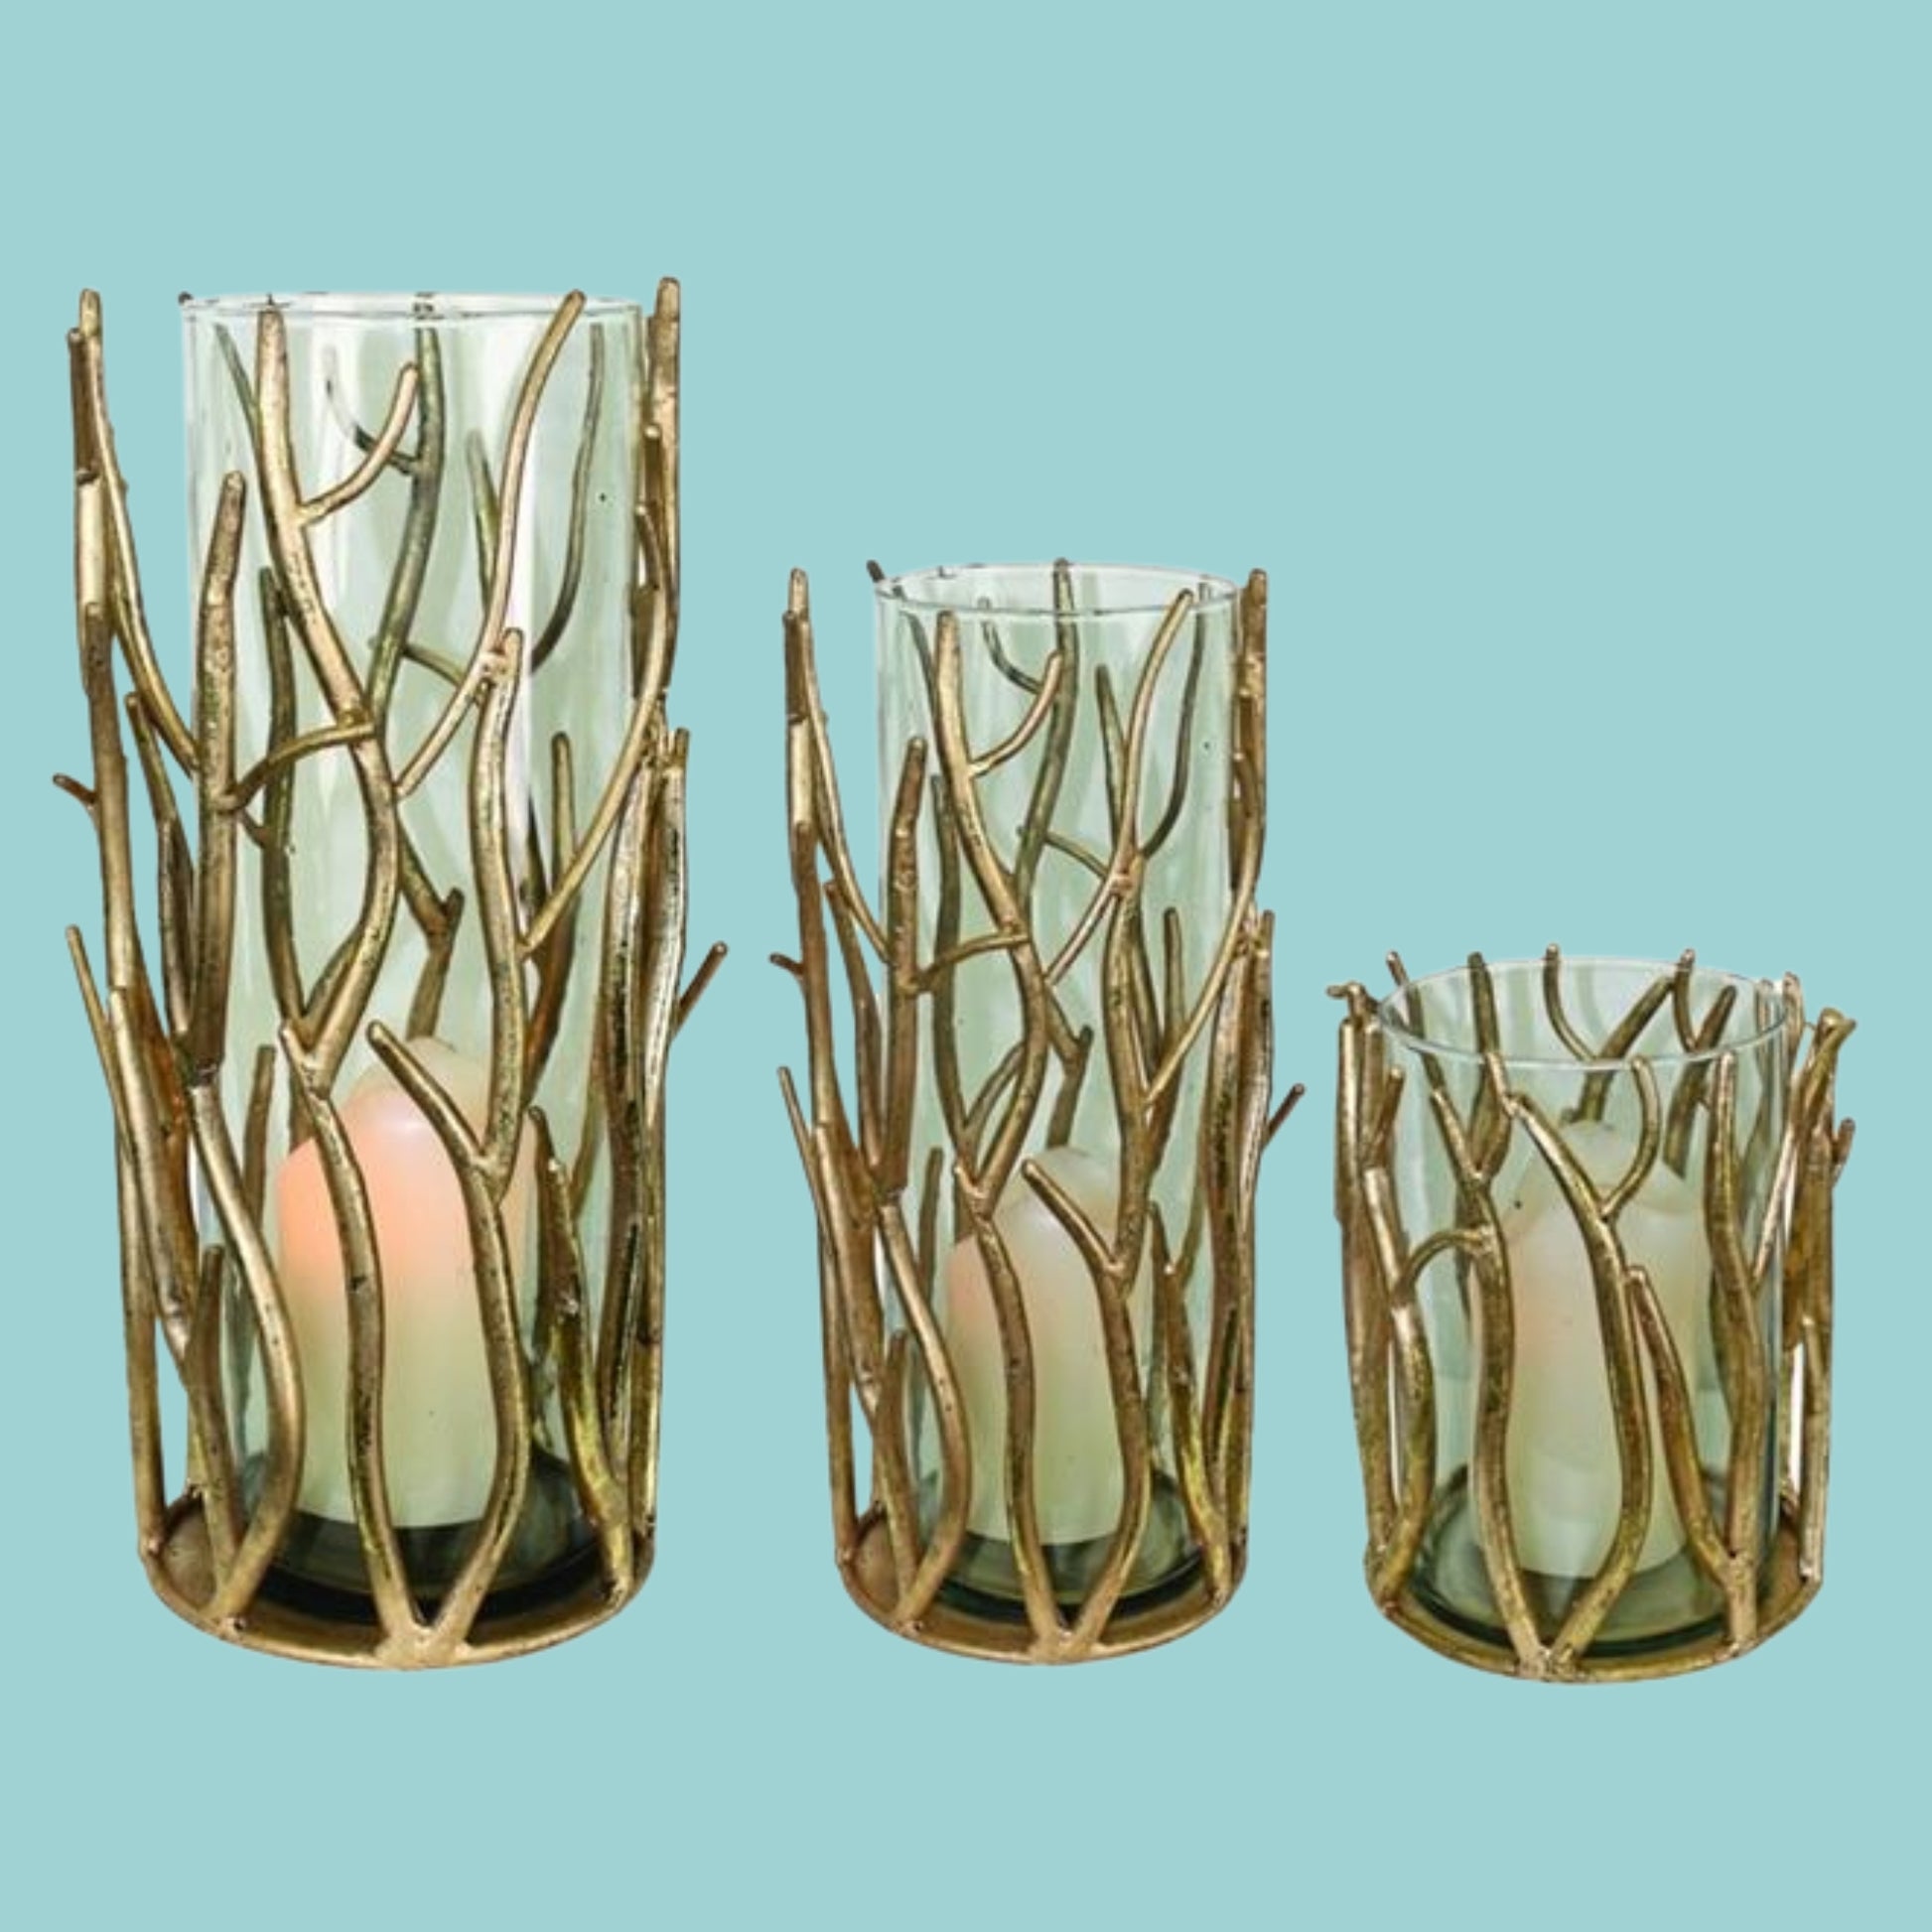 Italian Gold Iron Hurricanes - Twig Accent Iron & Glass Candle Holders - 3 Sizes to Choose From | Shown with a Coastal Blue background for inspiration | Beautiful beach house decor | INSIDE OUT | InsideOutCatalog.com